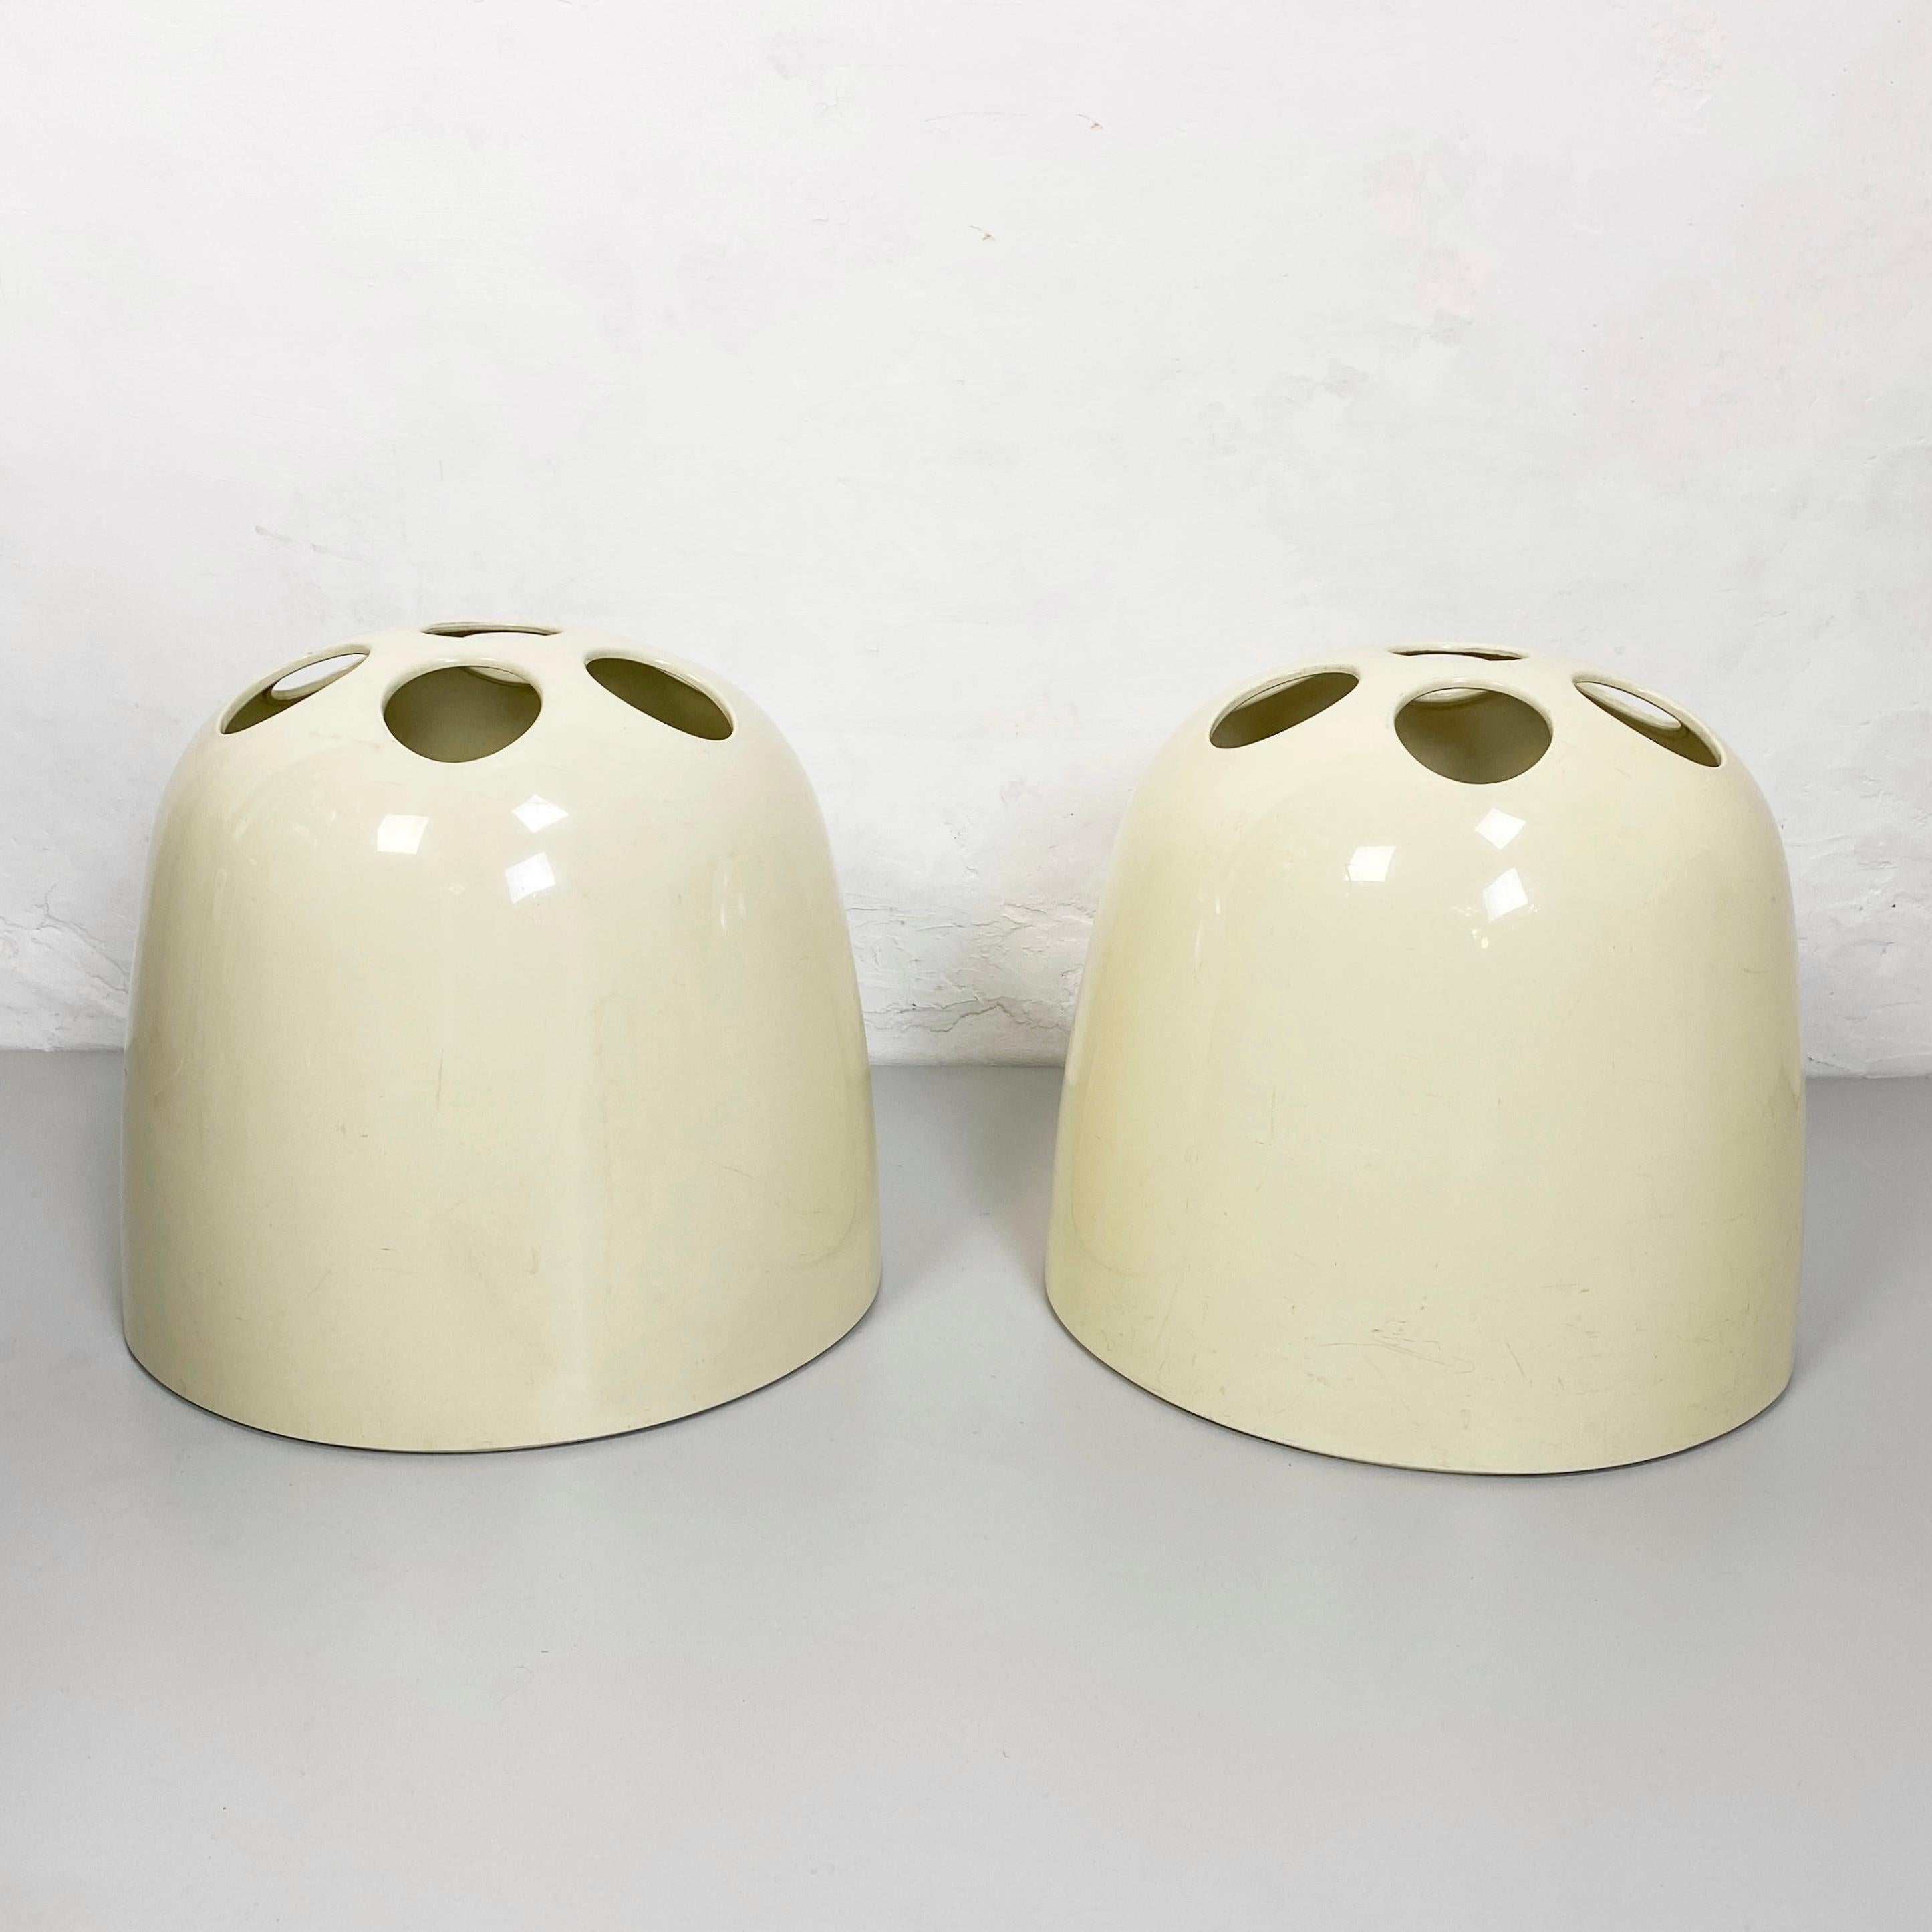 Set of umbrella stand Dedalo by Emma Gismondi for Artemide, 1960s
Set di umbrella stand in white plastic Dedalo designed by Emma Gismondi Schweinberger for Studio Artemide Milano in the 1960s.
The bottom of the stand is detachable so it can be